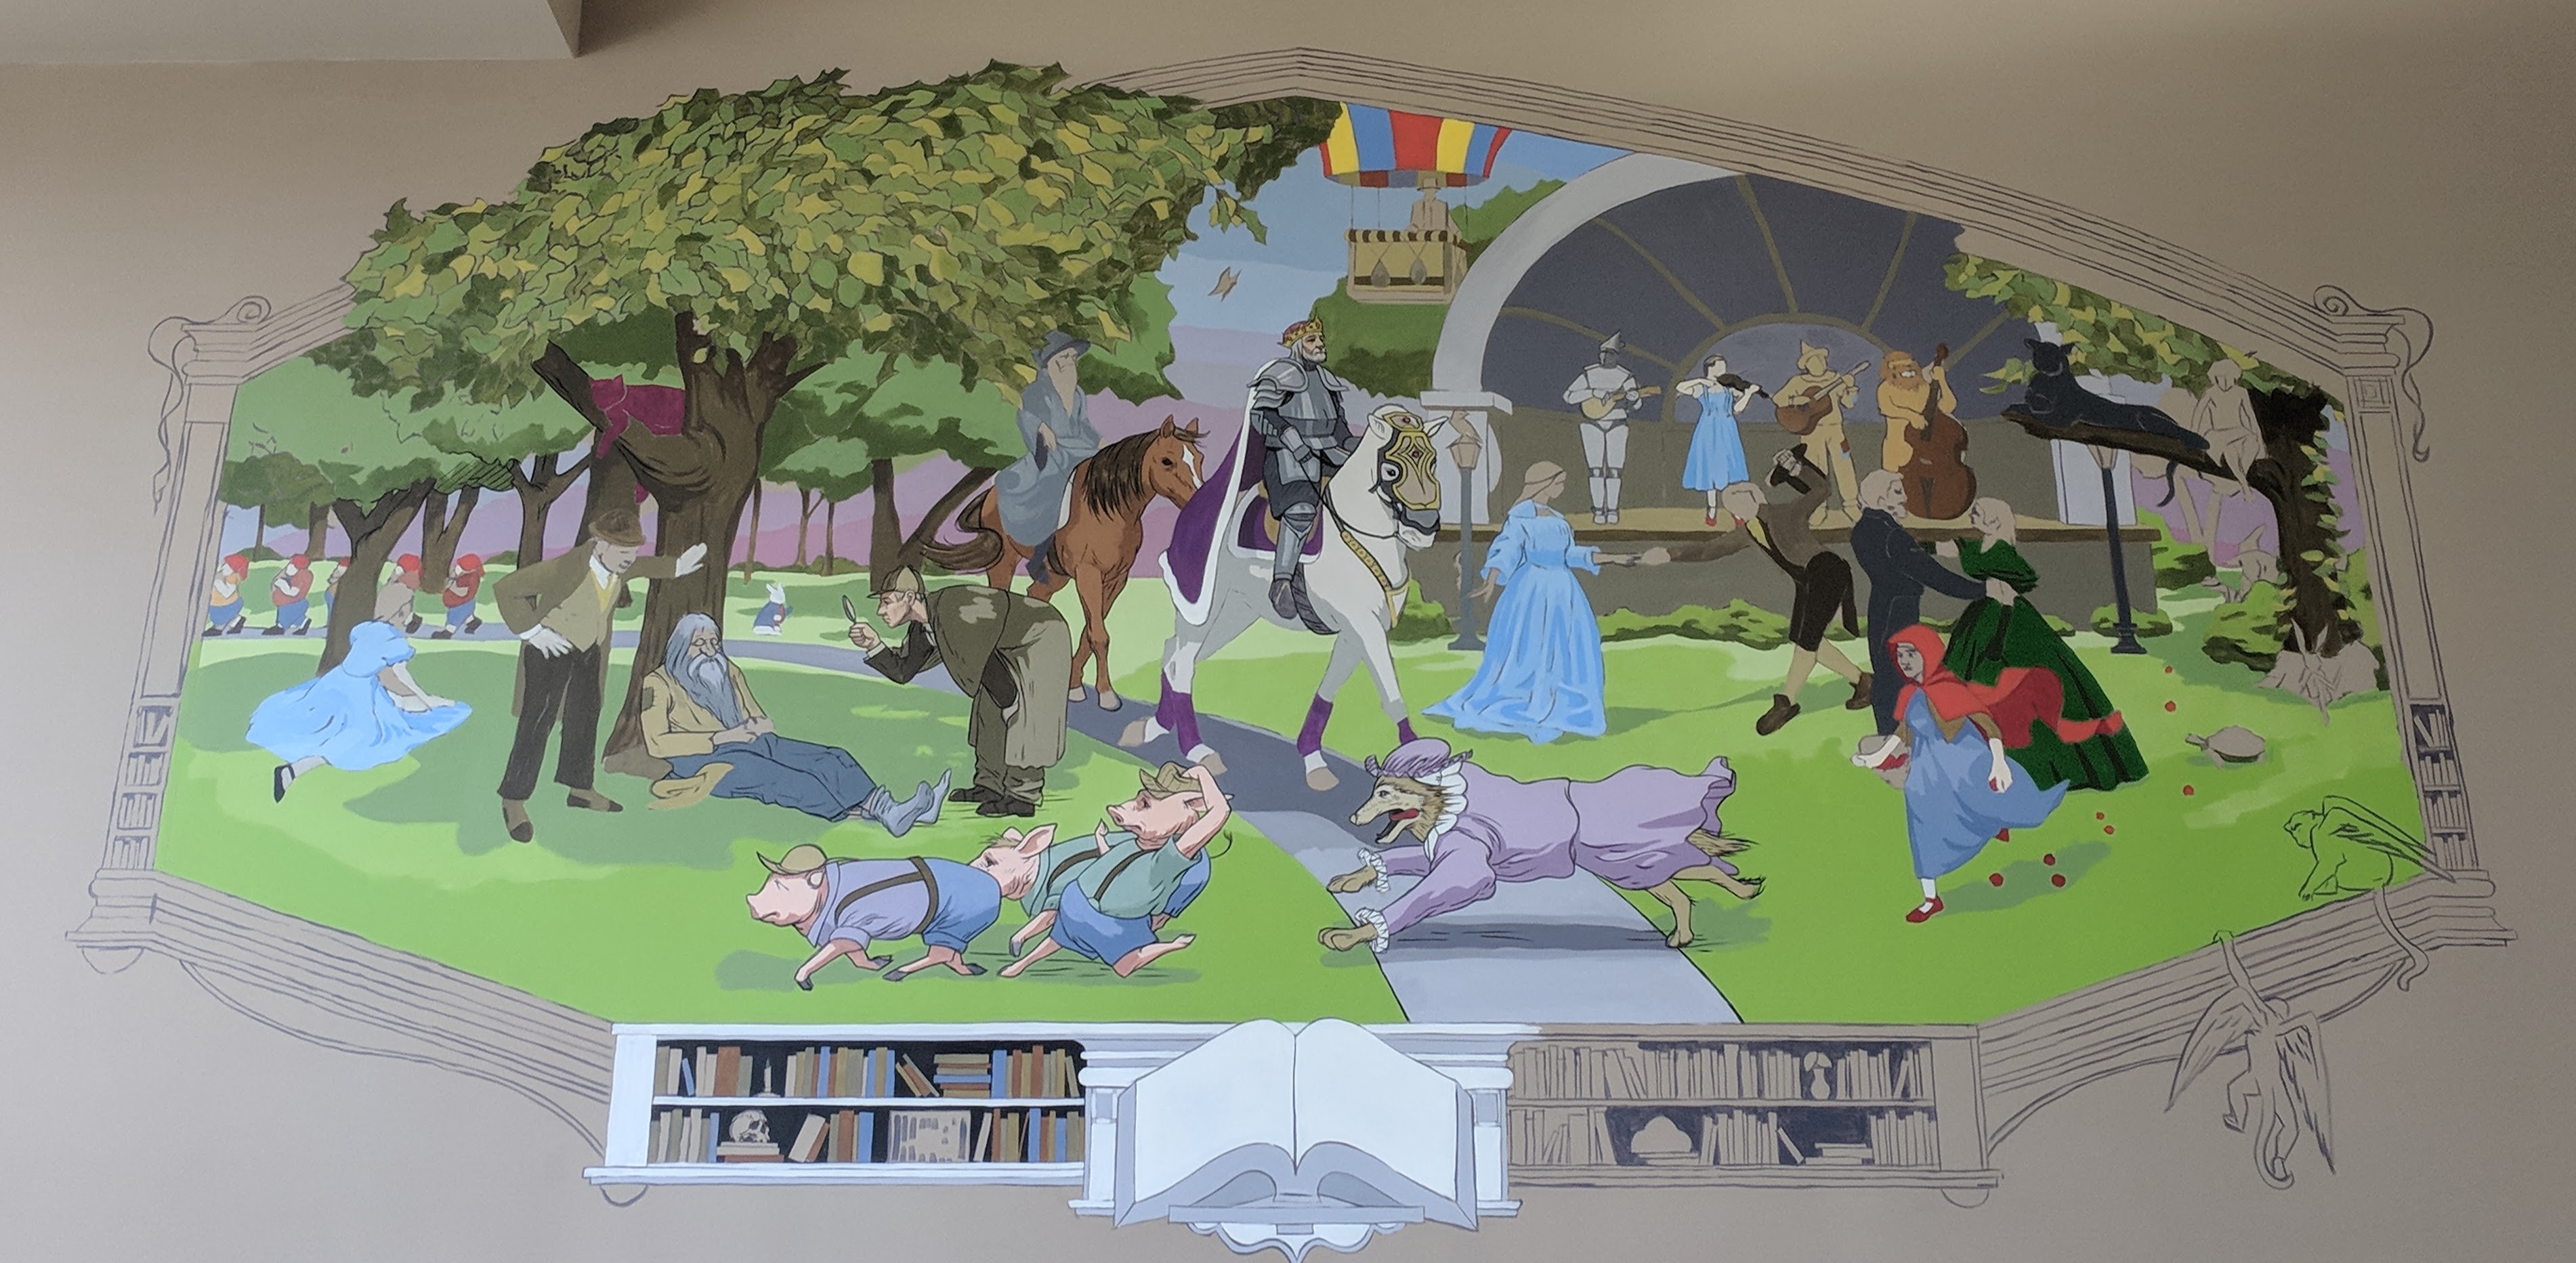 Mostly complete mural with frame elements unpainted